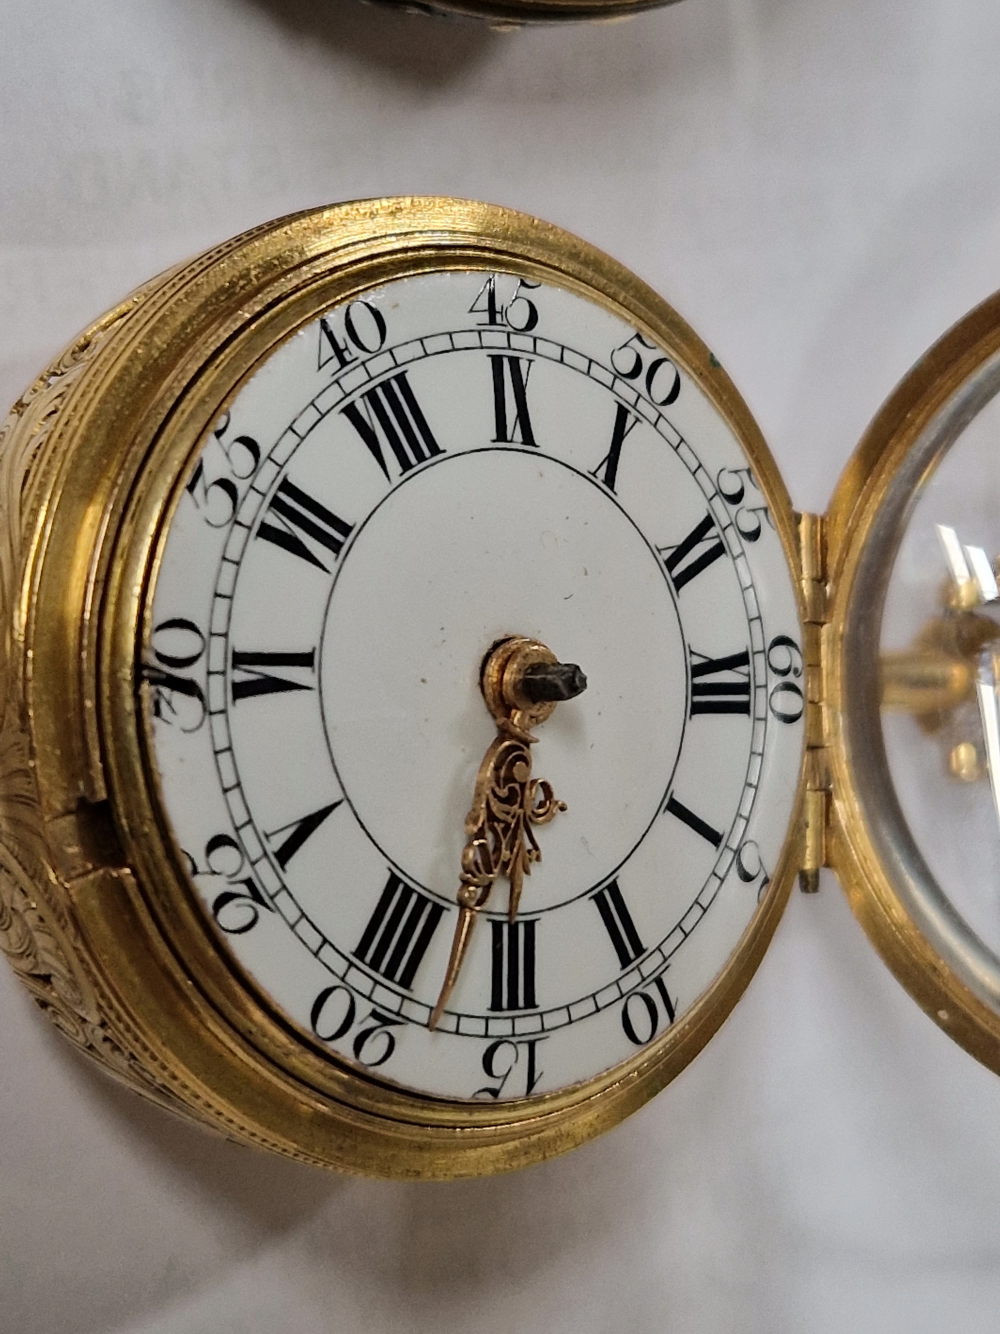 AN ANTIQUE GOLD PAIR CASED POCKET WATCH, SIGNED BONLY LONDON, (SIC) PROBABLY DEVERAUX BOWLEY, - Image 14 of 21